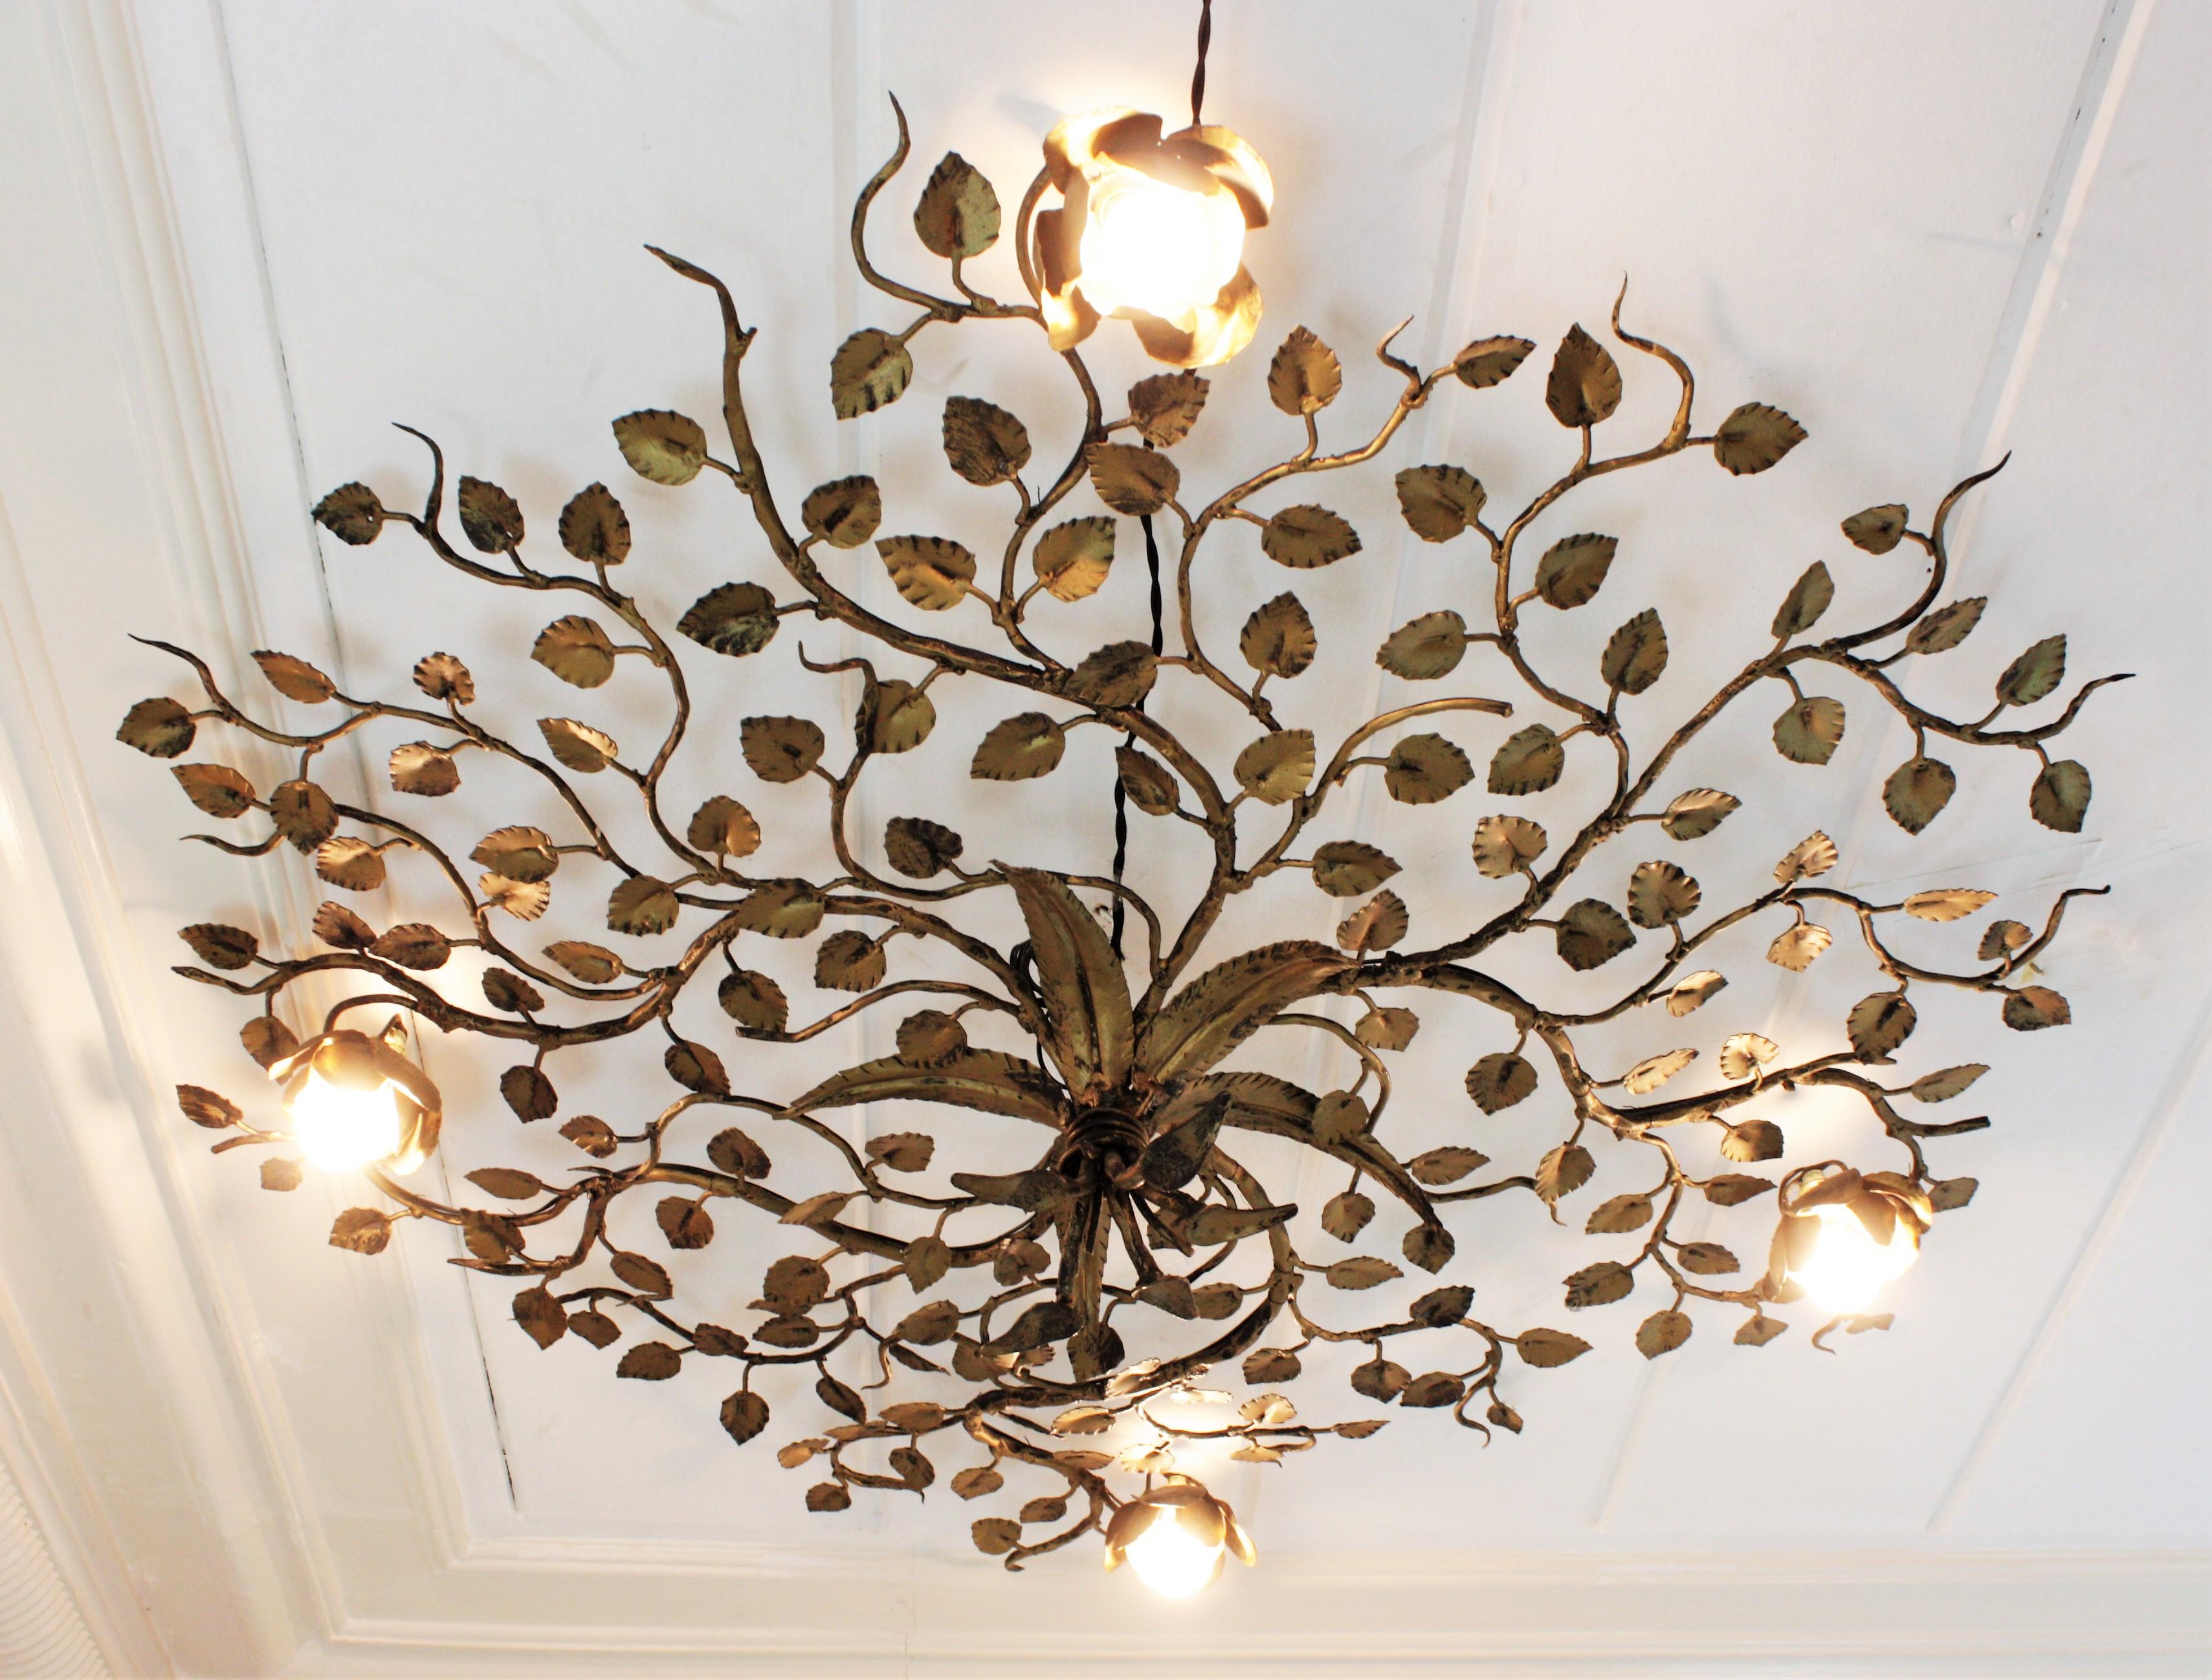 Rosebush tree ornate ceiling flush mount, hand forged gilt iron, Spain, 1960s. 
Monumental large size ( 50,78 in ) hand-hammered gilt iron foliage flower bush ceiling light fixture with four flower lights.
This ceiling light fixture was entirely